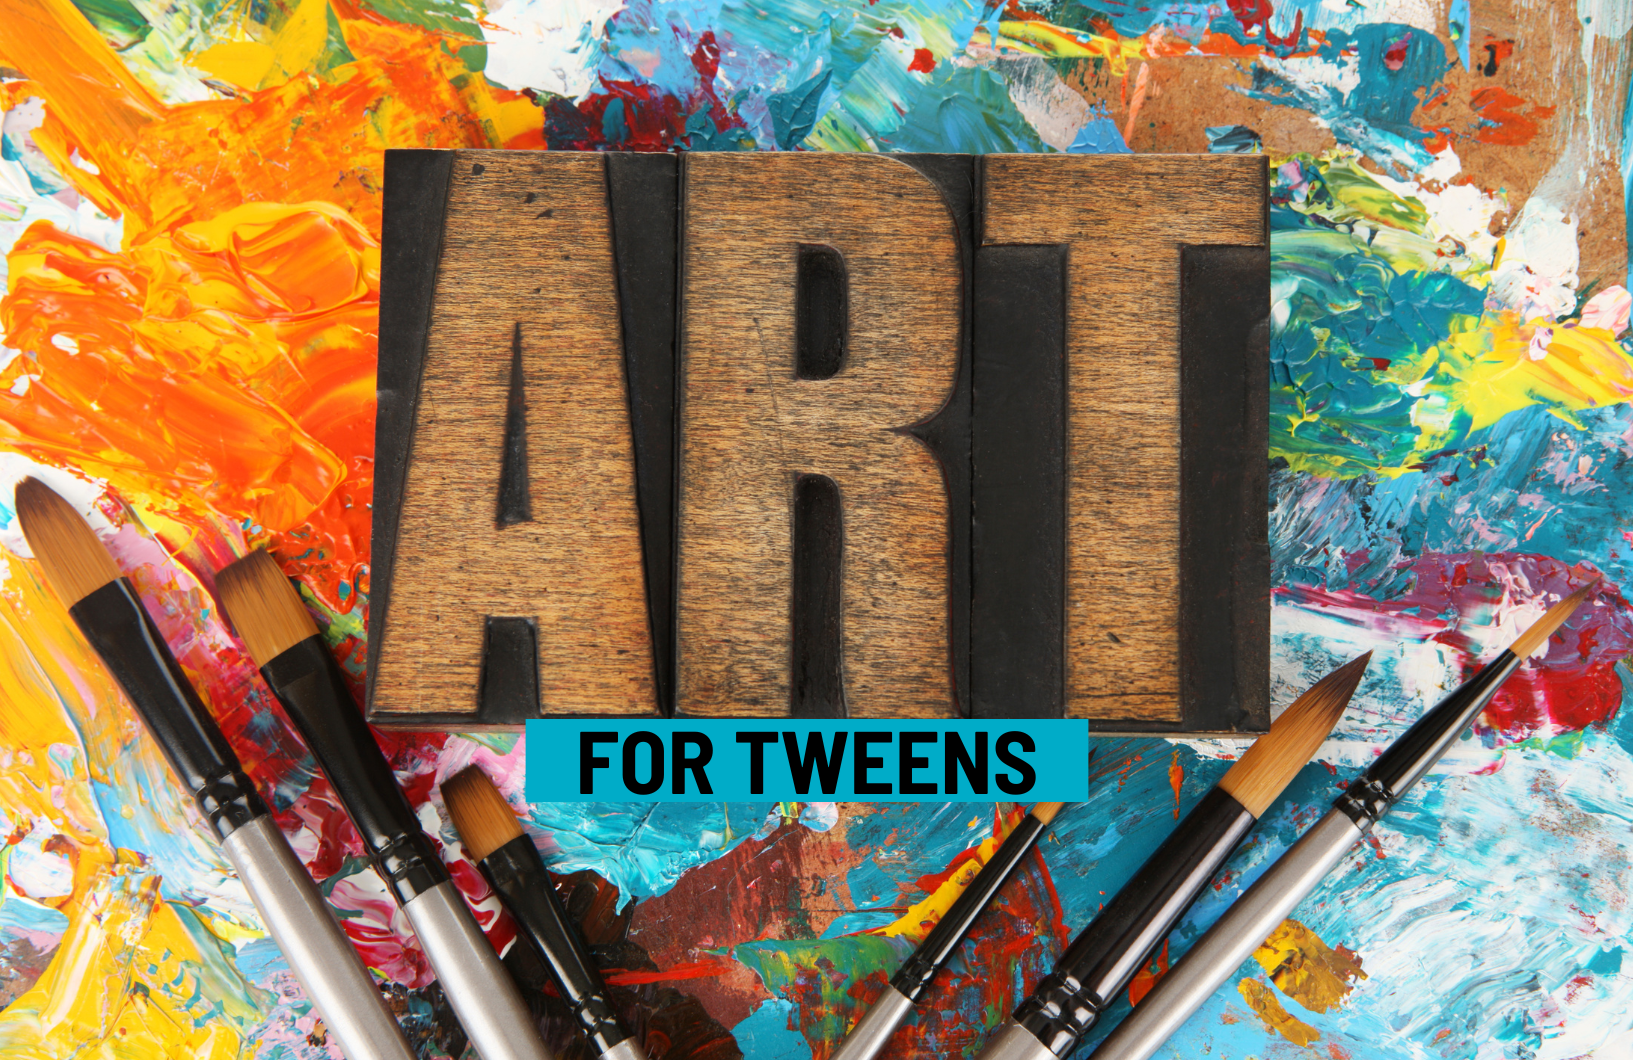 "Art for Tweens" spelled out over paint splotches and brushes. 